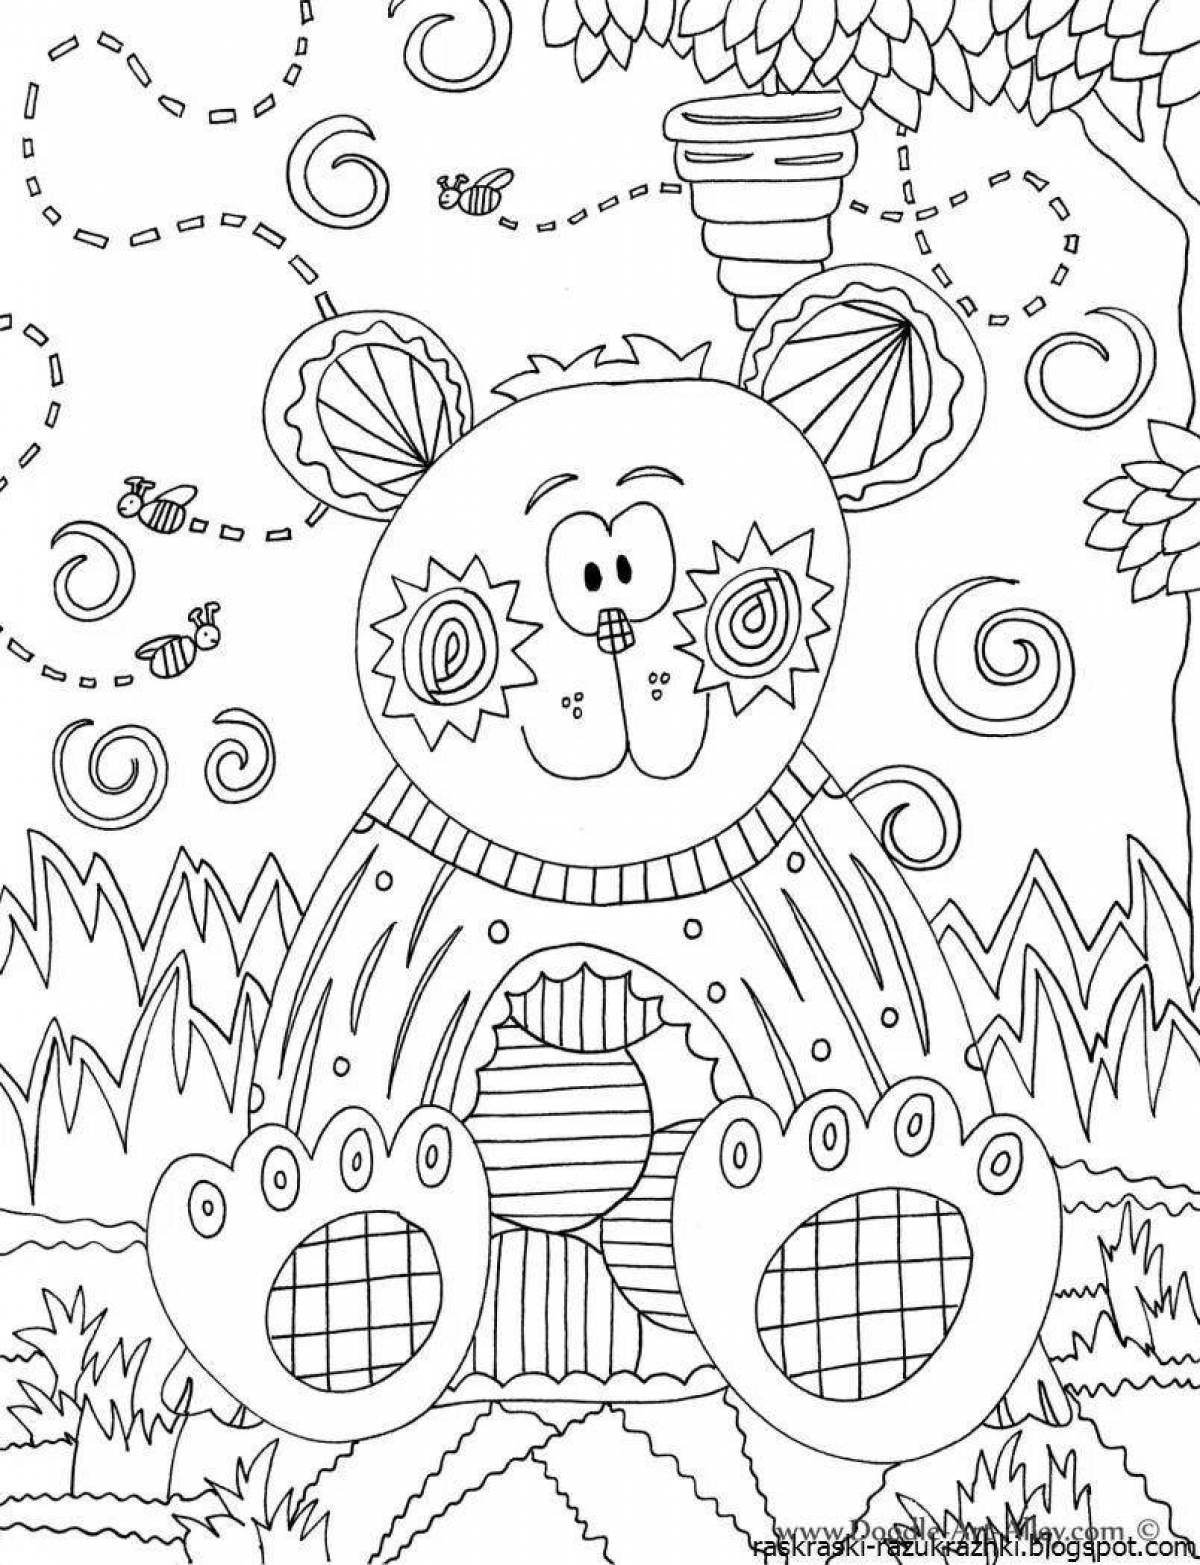 Inspirational coloring book highlights